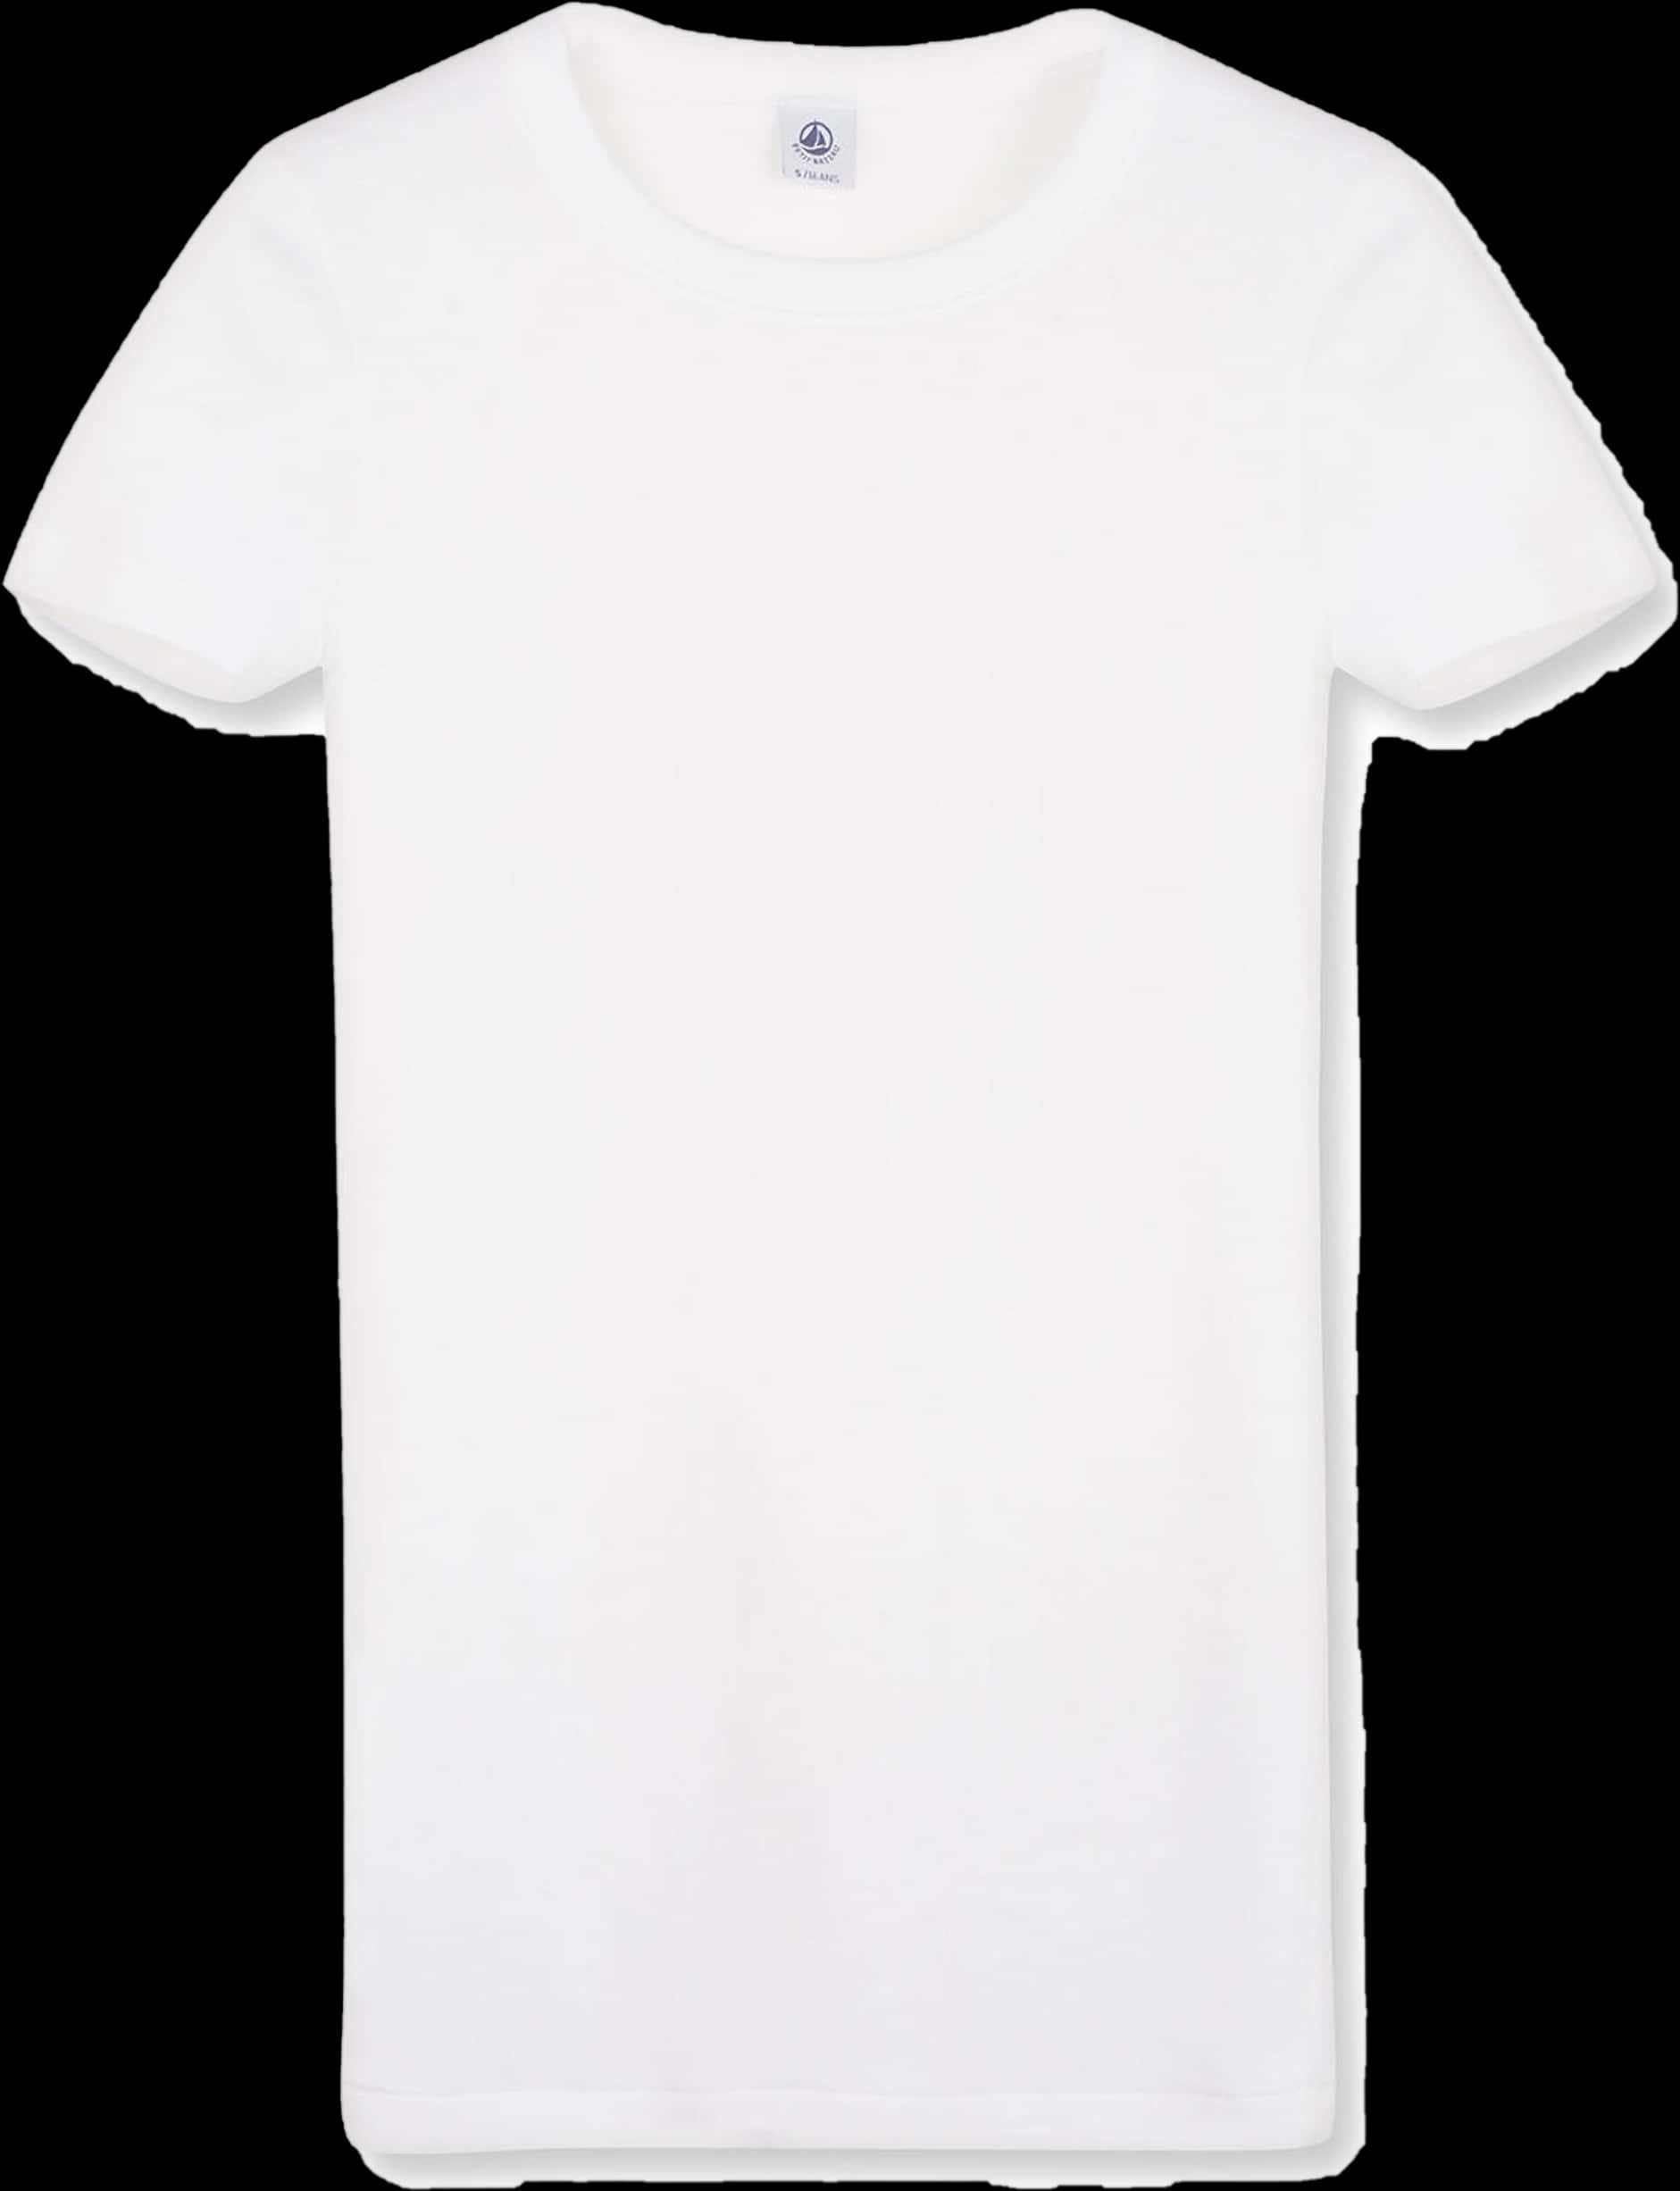 Plain White T Shirt Isolated PNG